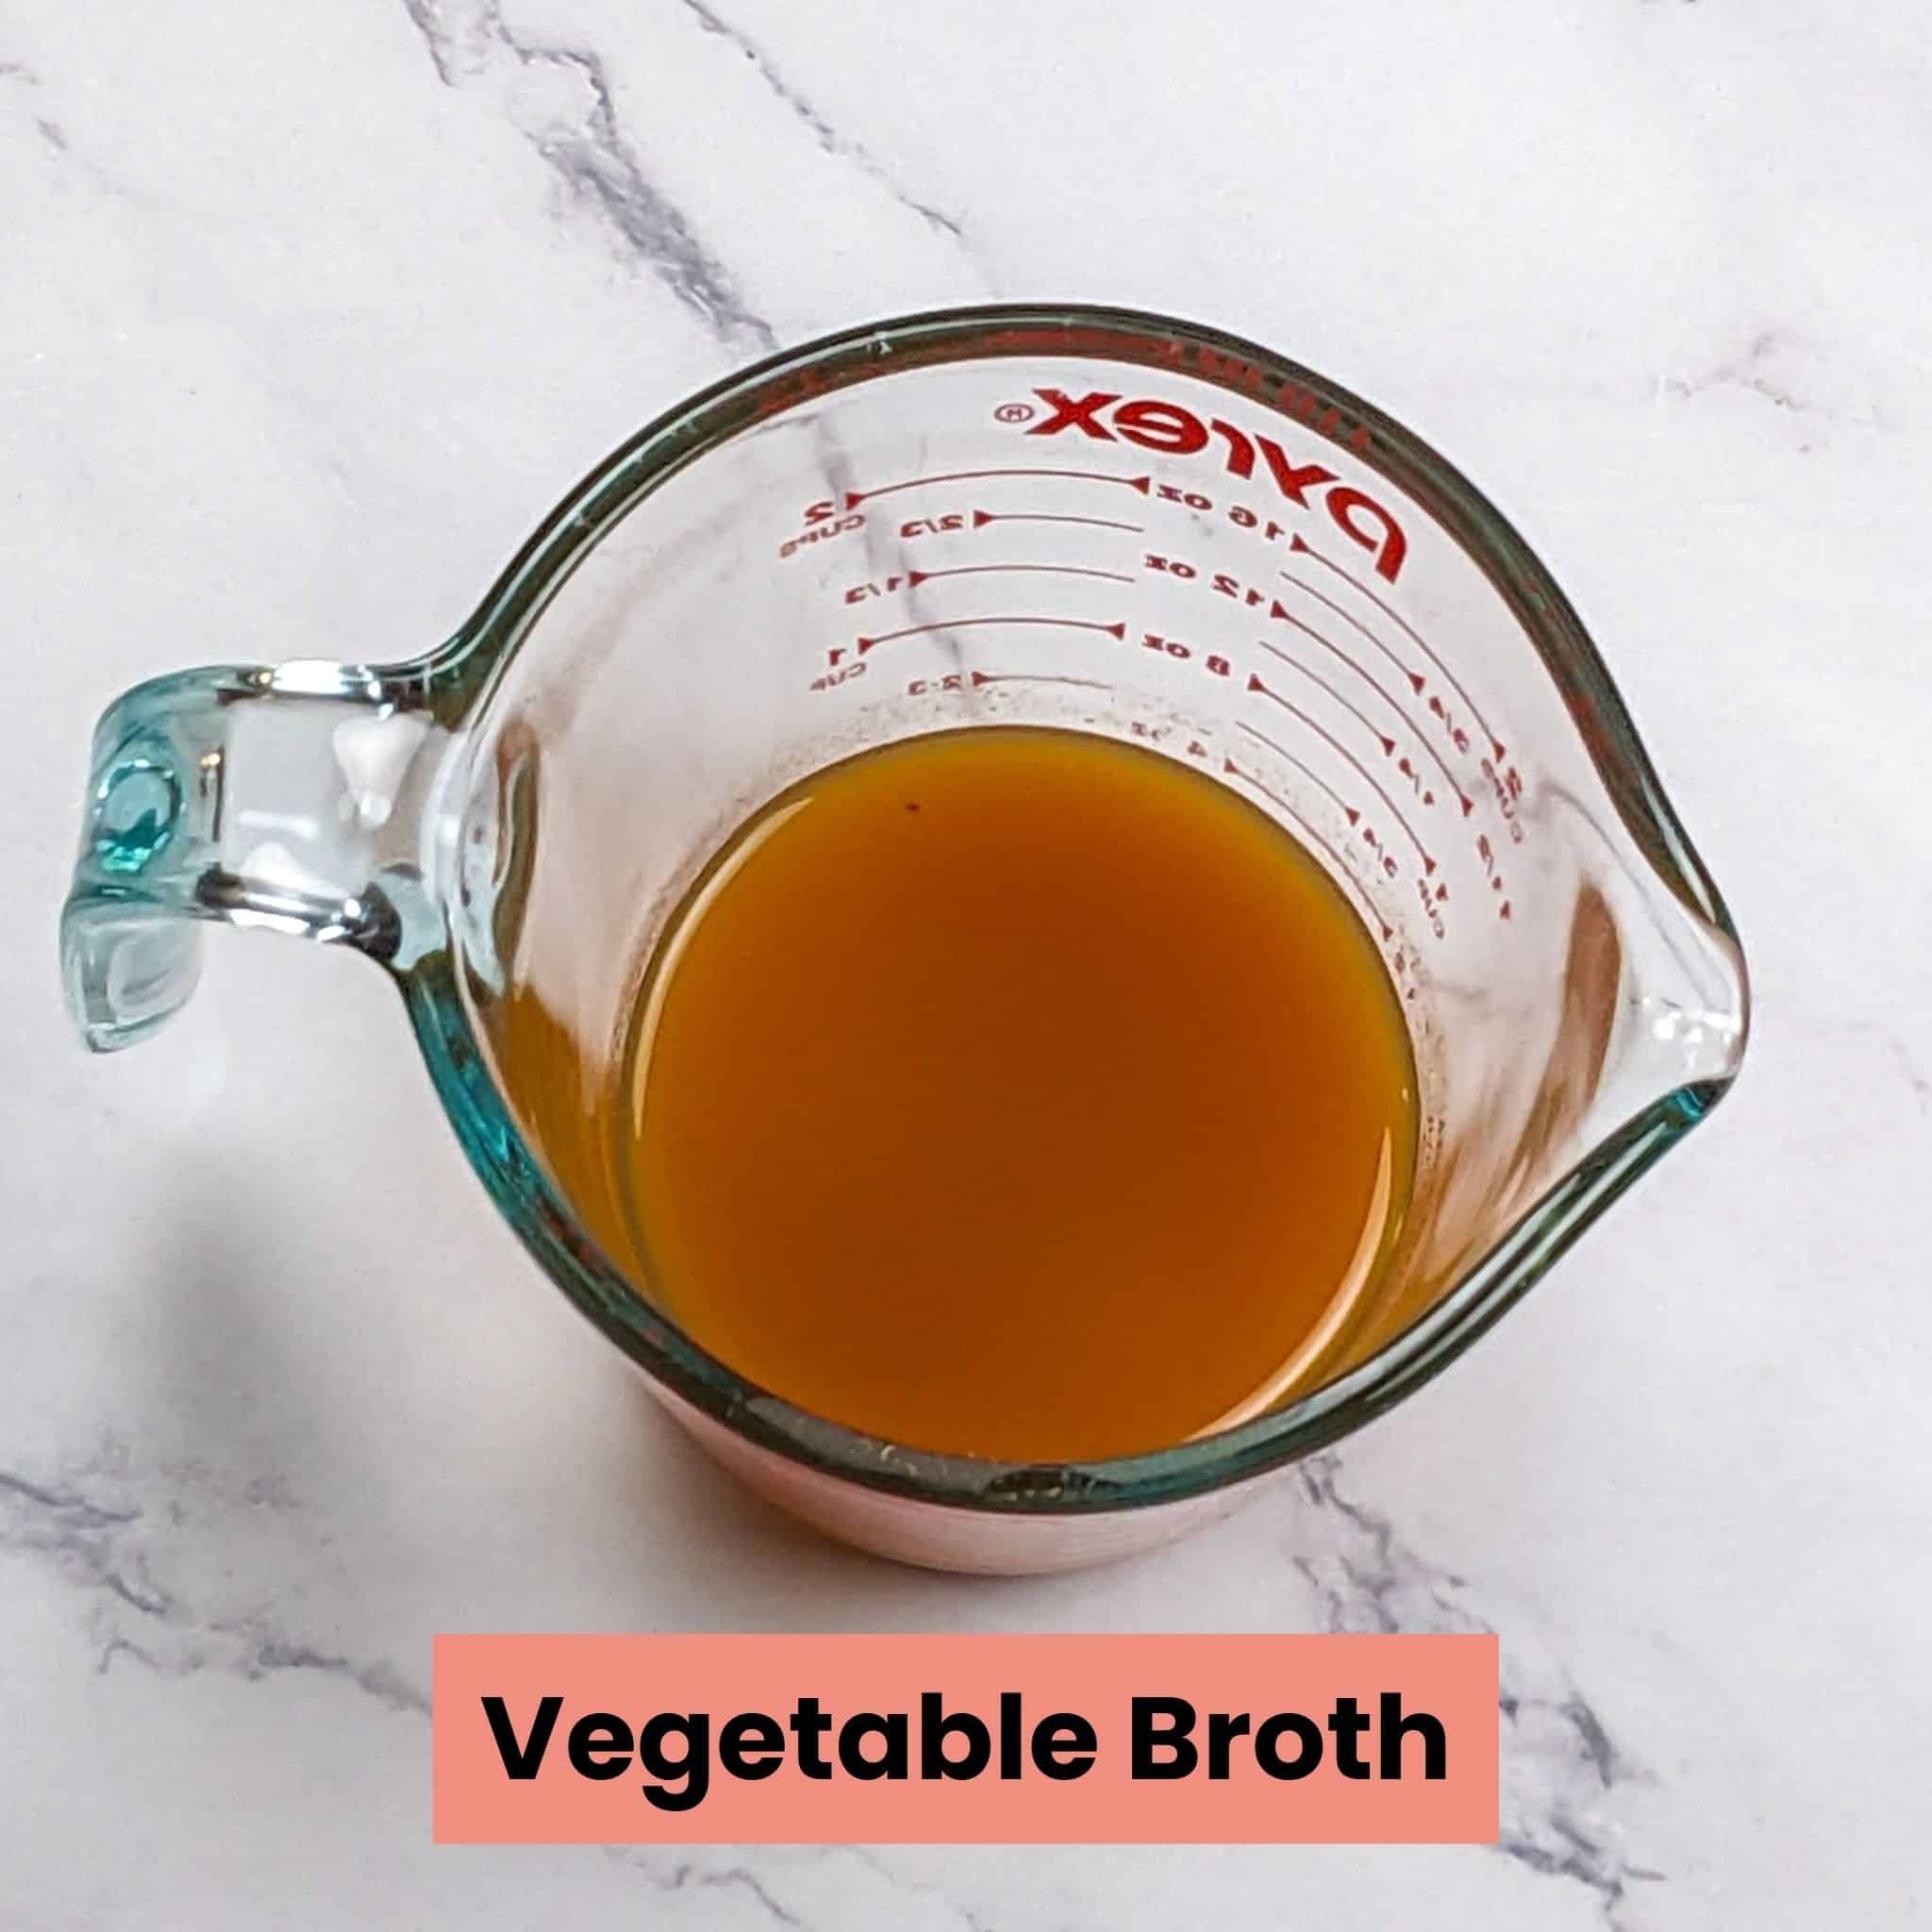 pyrex measuring cup with vegetable broth